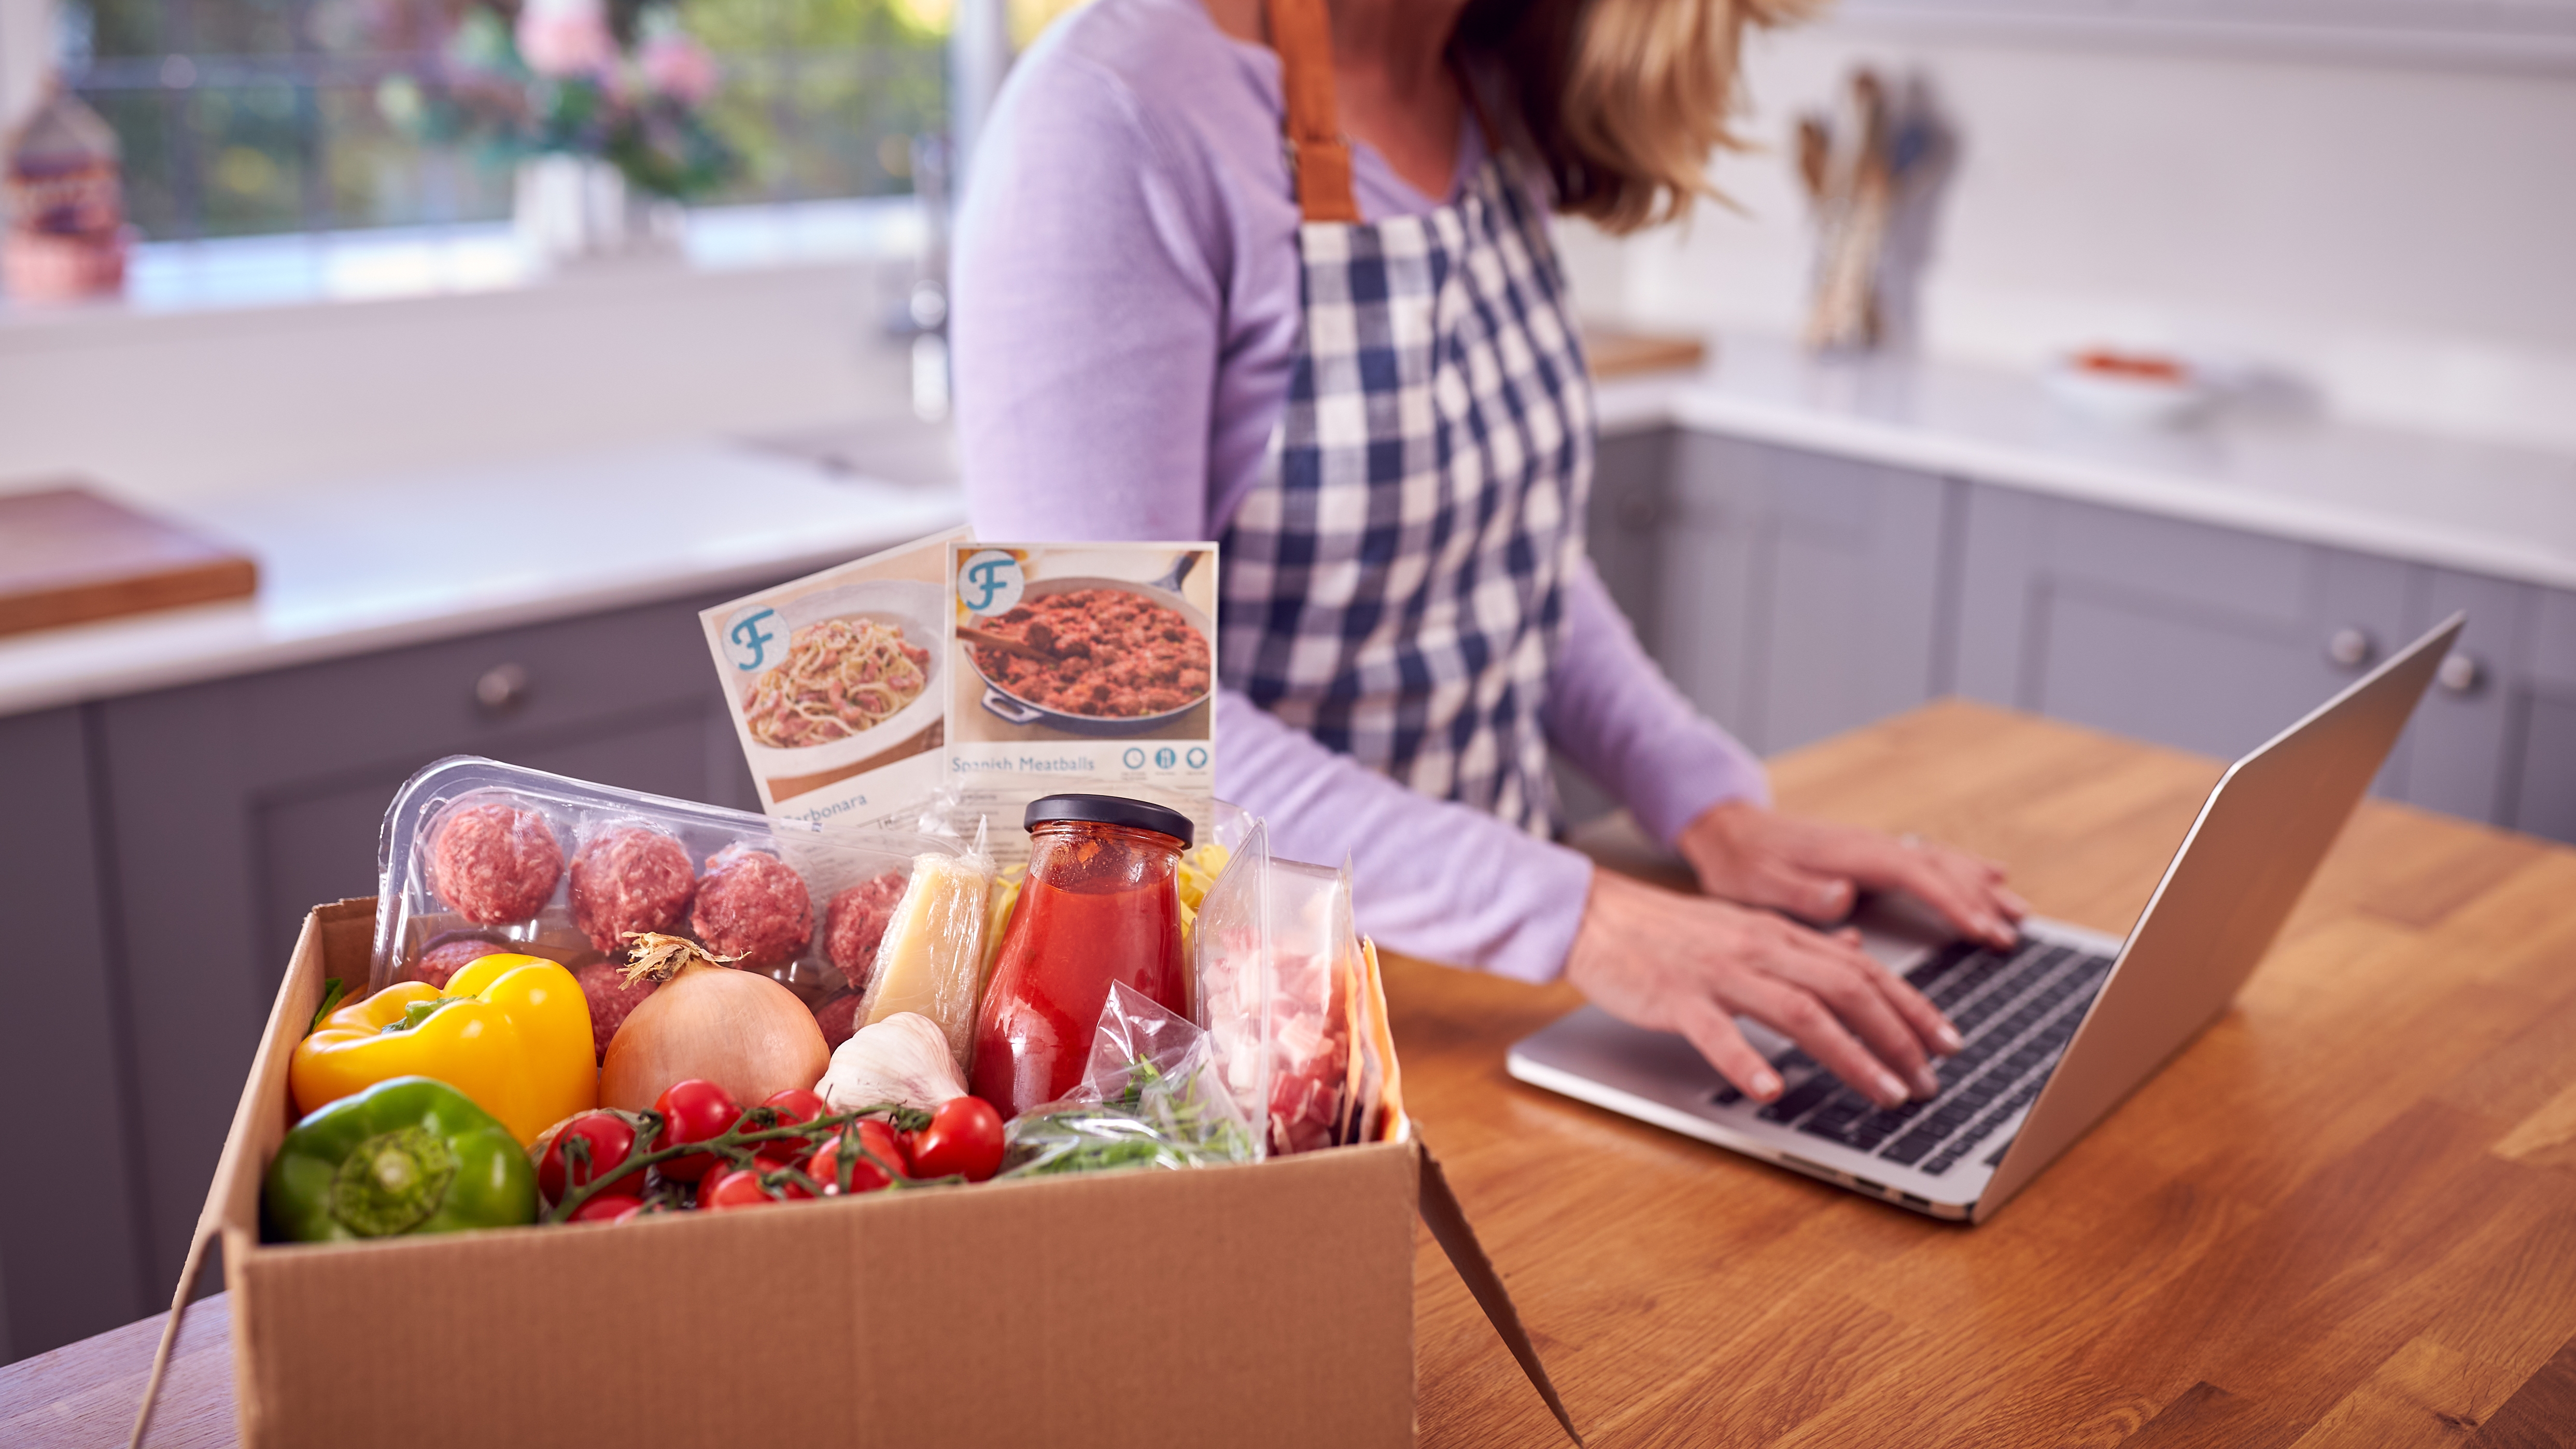 Woman wearing a purple shirt on her laptop next to a food delivery box